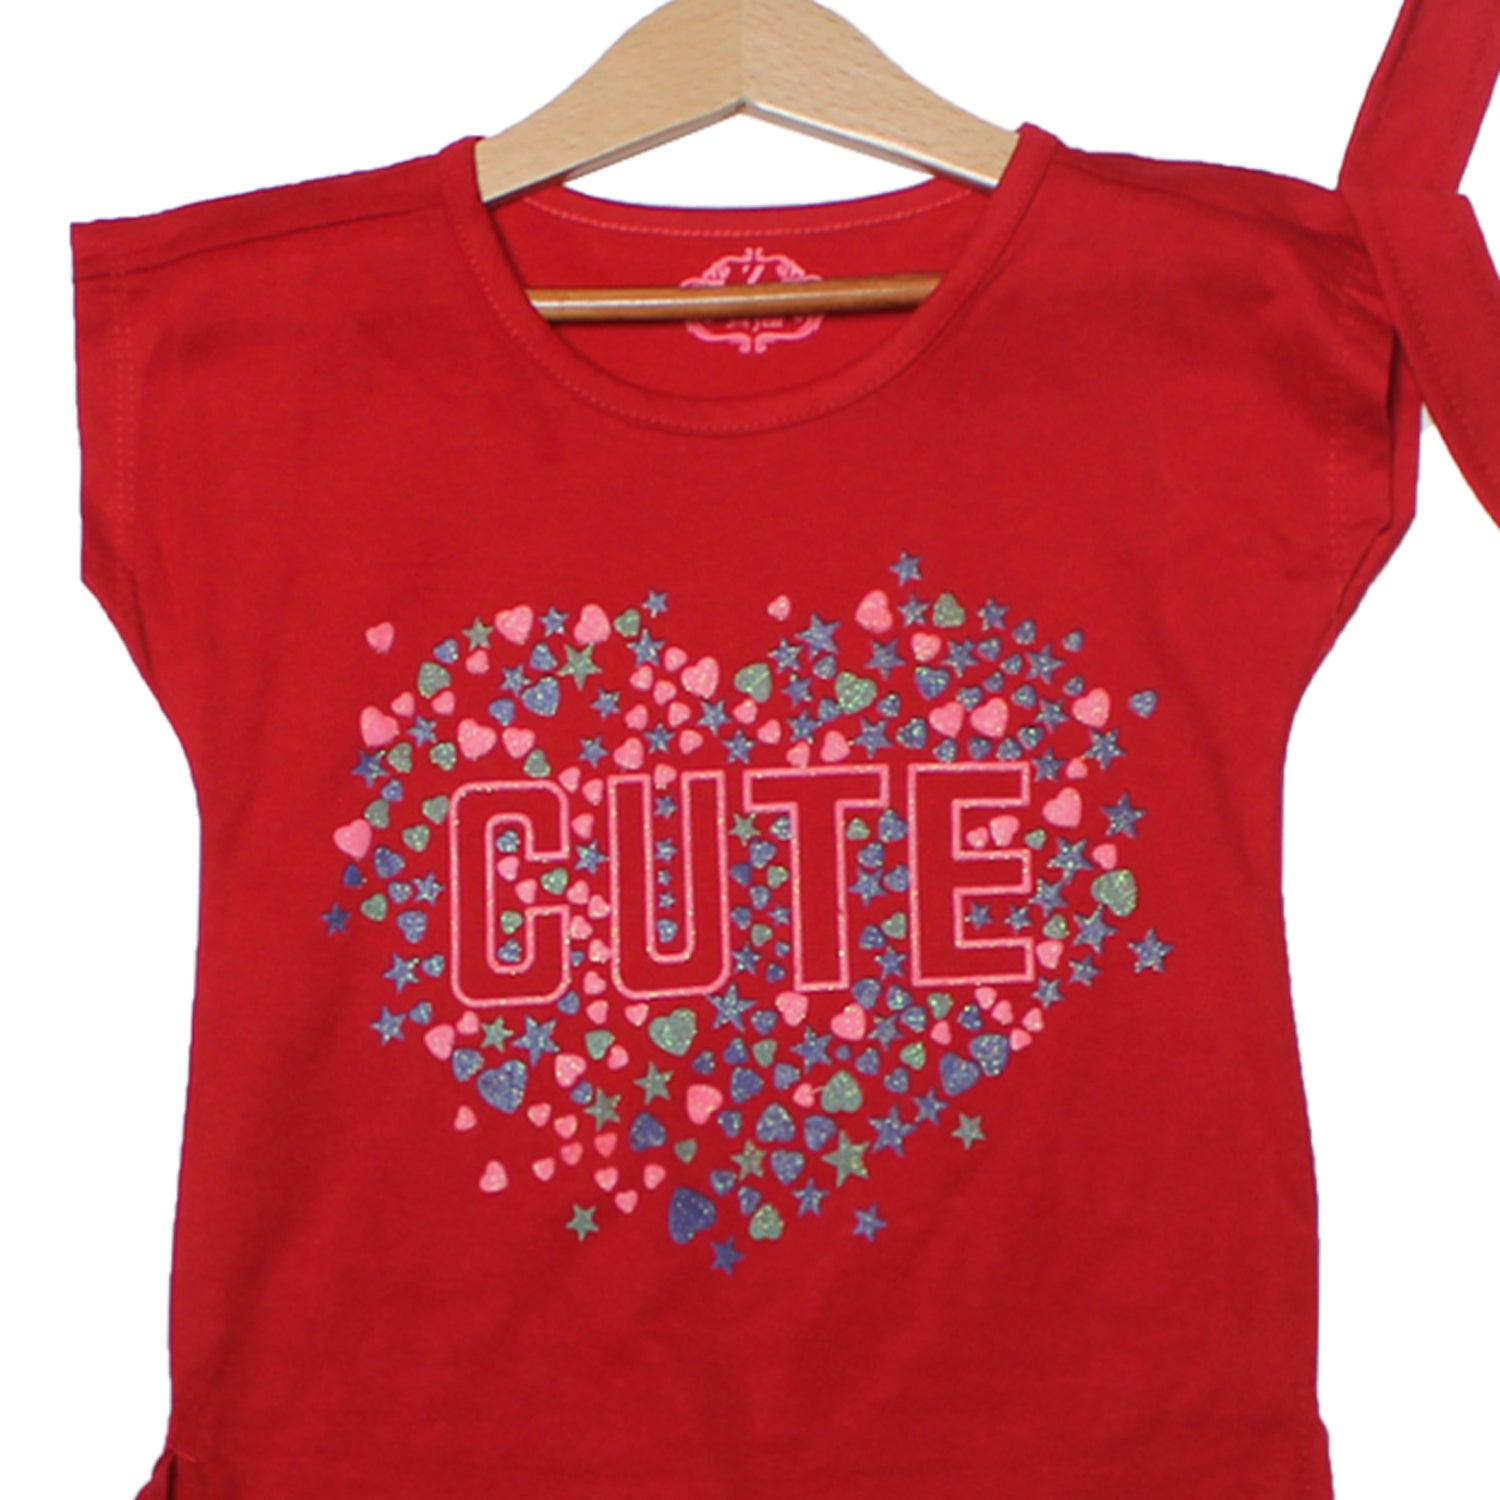 NEW RED CUTE HEART PRINTED T-SHIRT TOP FOR GIRLS